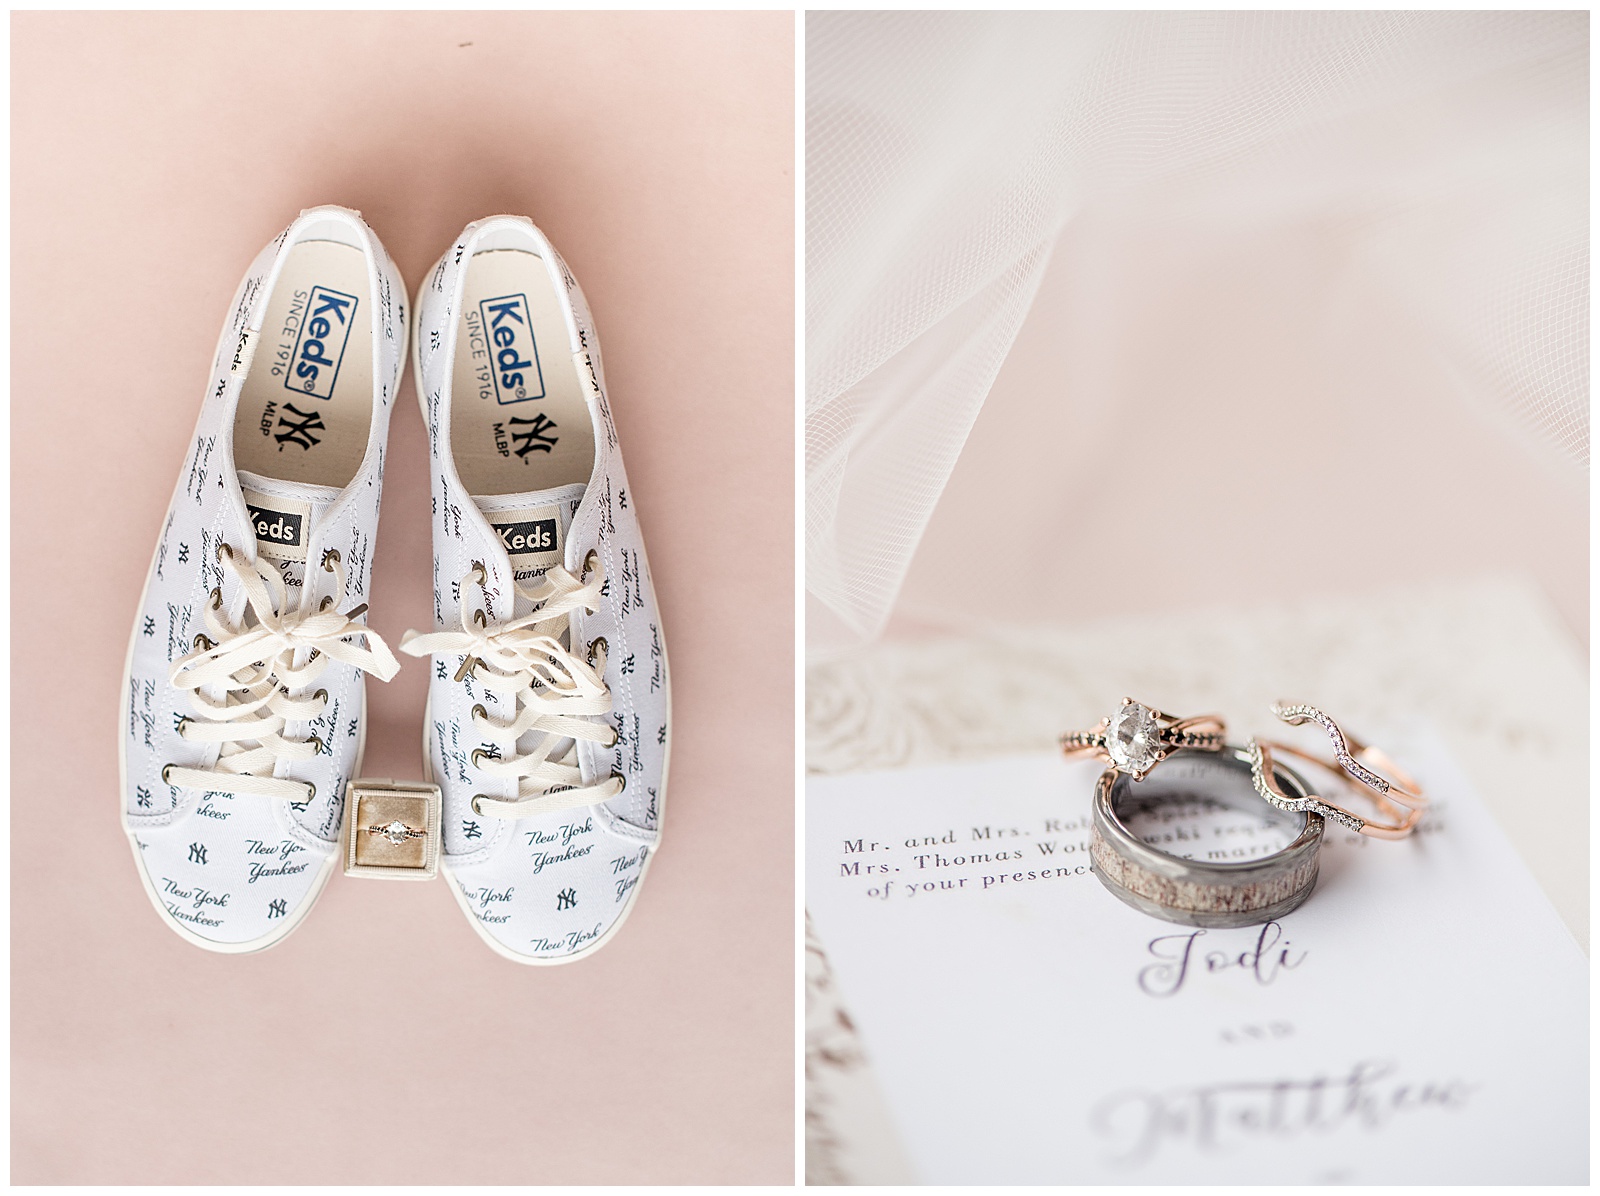 invitation and wedding rings and bride's keds sneakers displayed on blush background